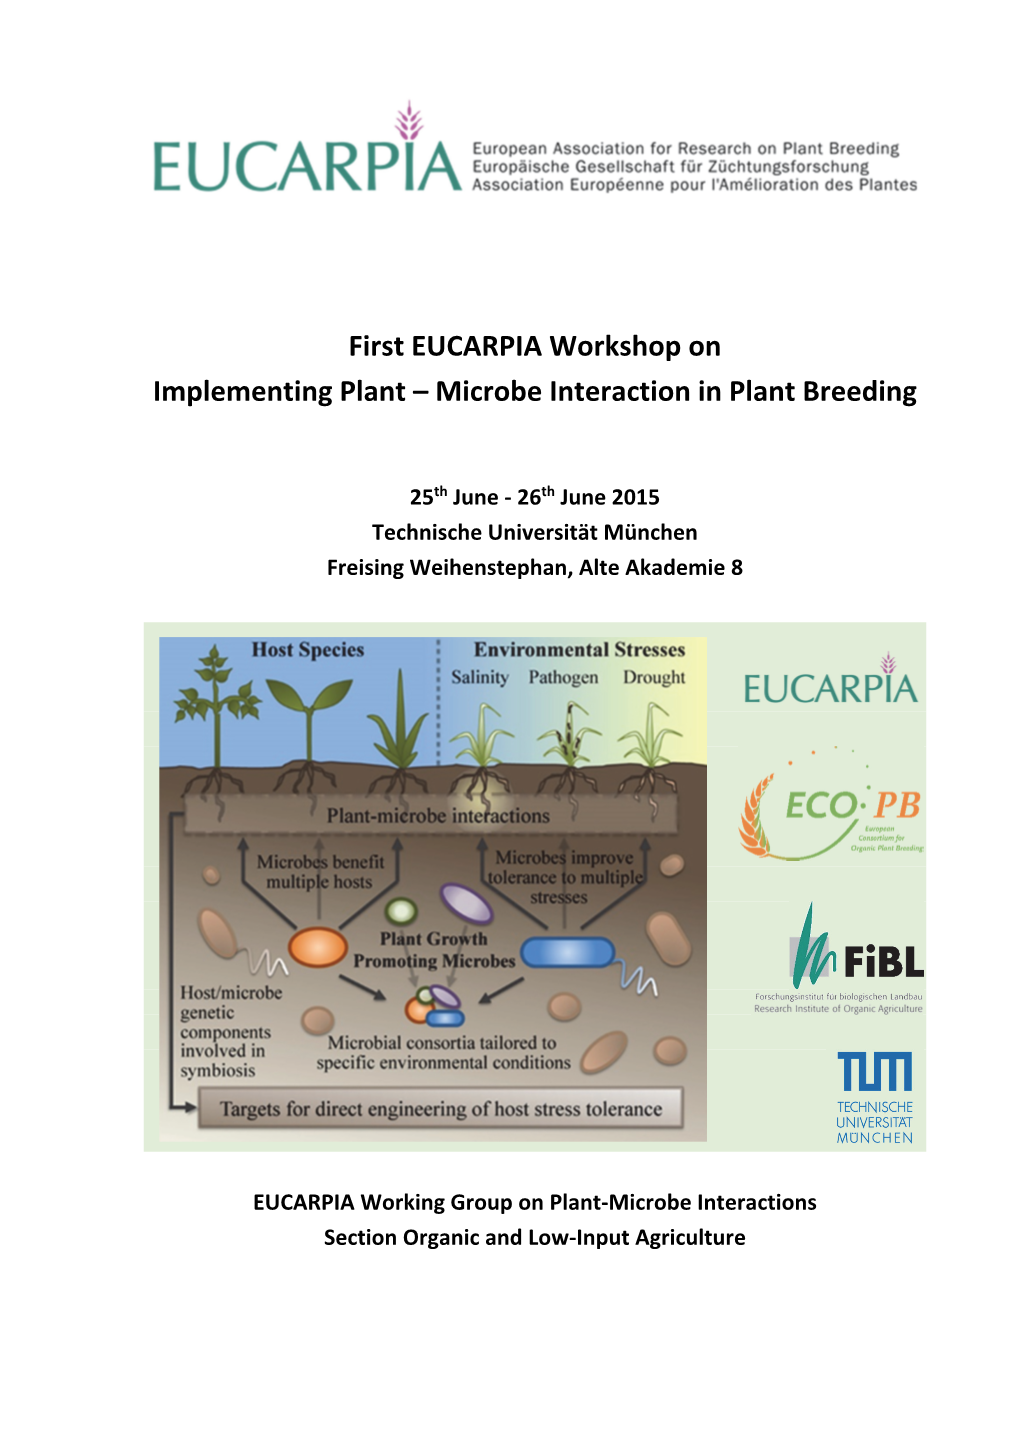 First EUCARPIA Workshop on Implementing Plant – Microbe Interaction in Plant Breeding